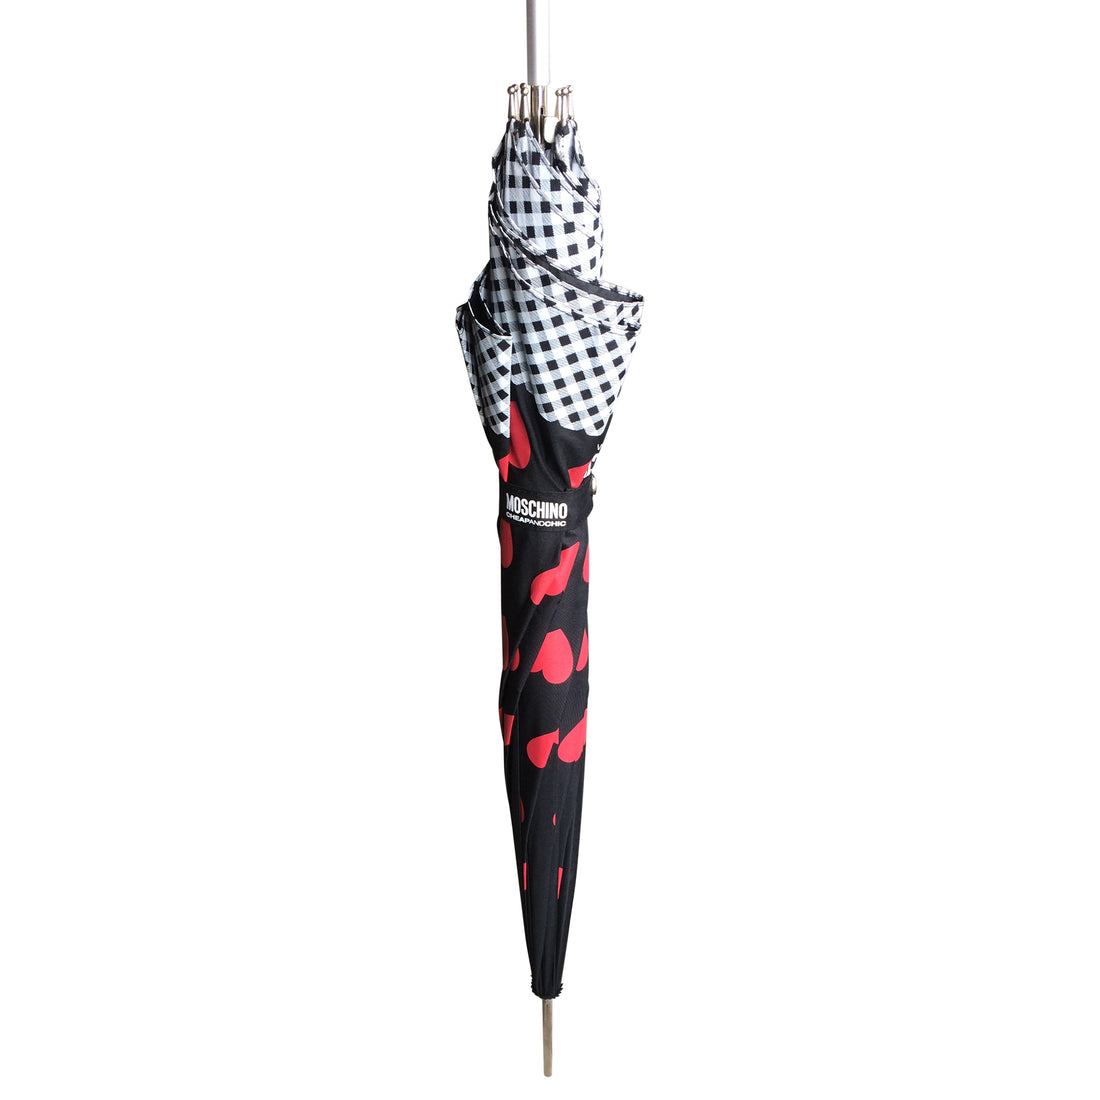 Moschino Cheap and Chic Black and Red Heart Umbrella